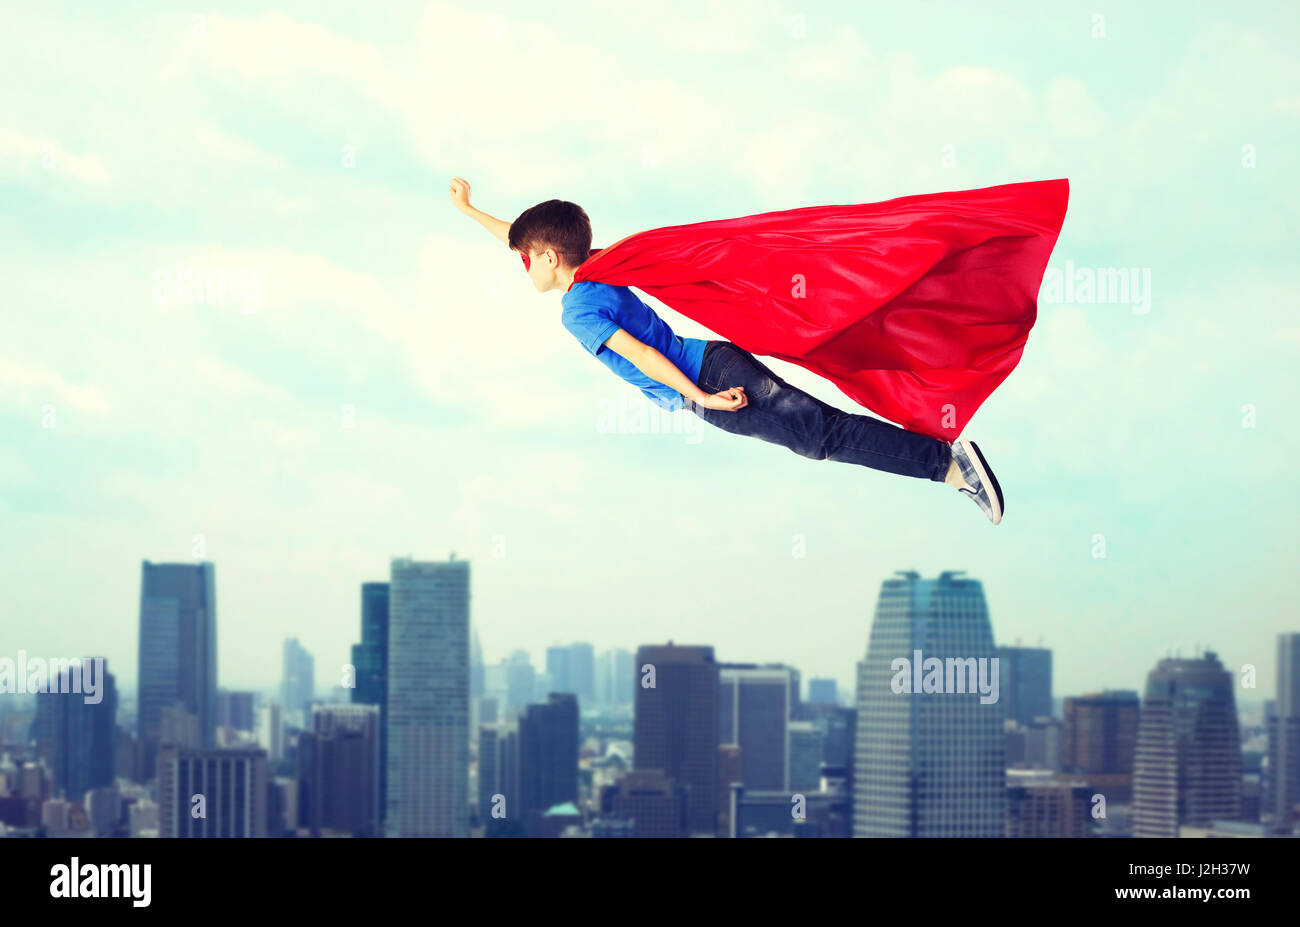 boy in red superhero cape and mask flying on air Stock Photo